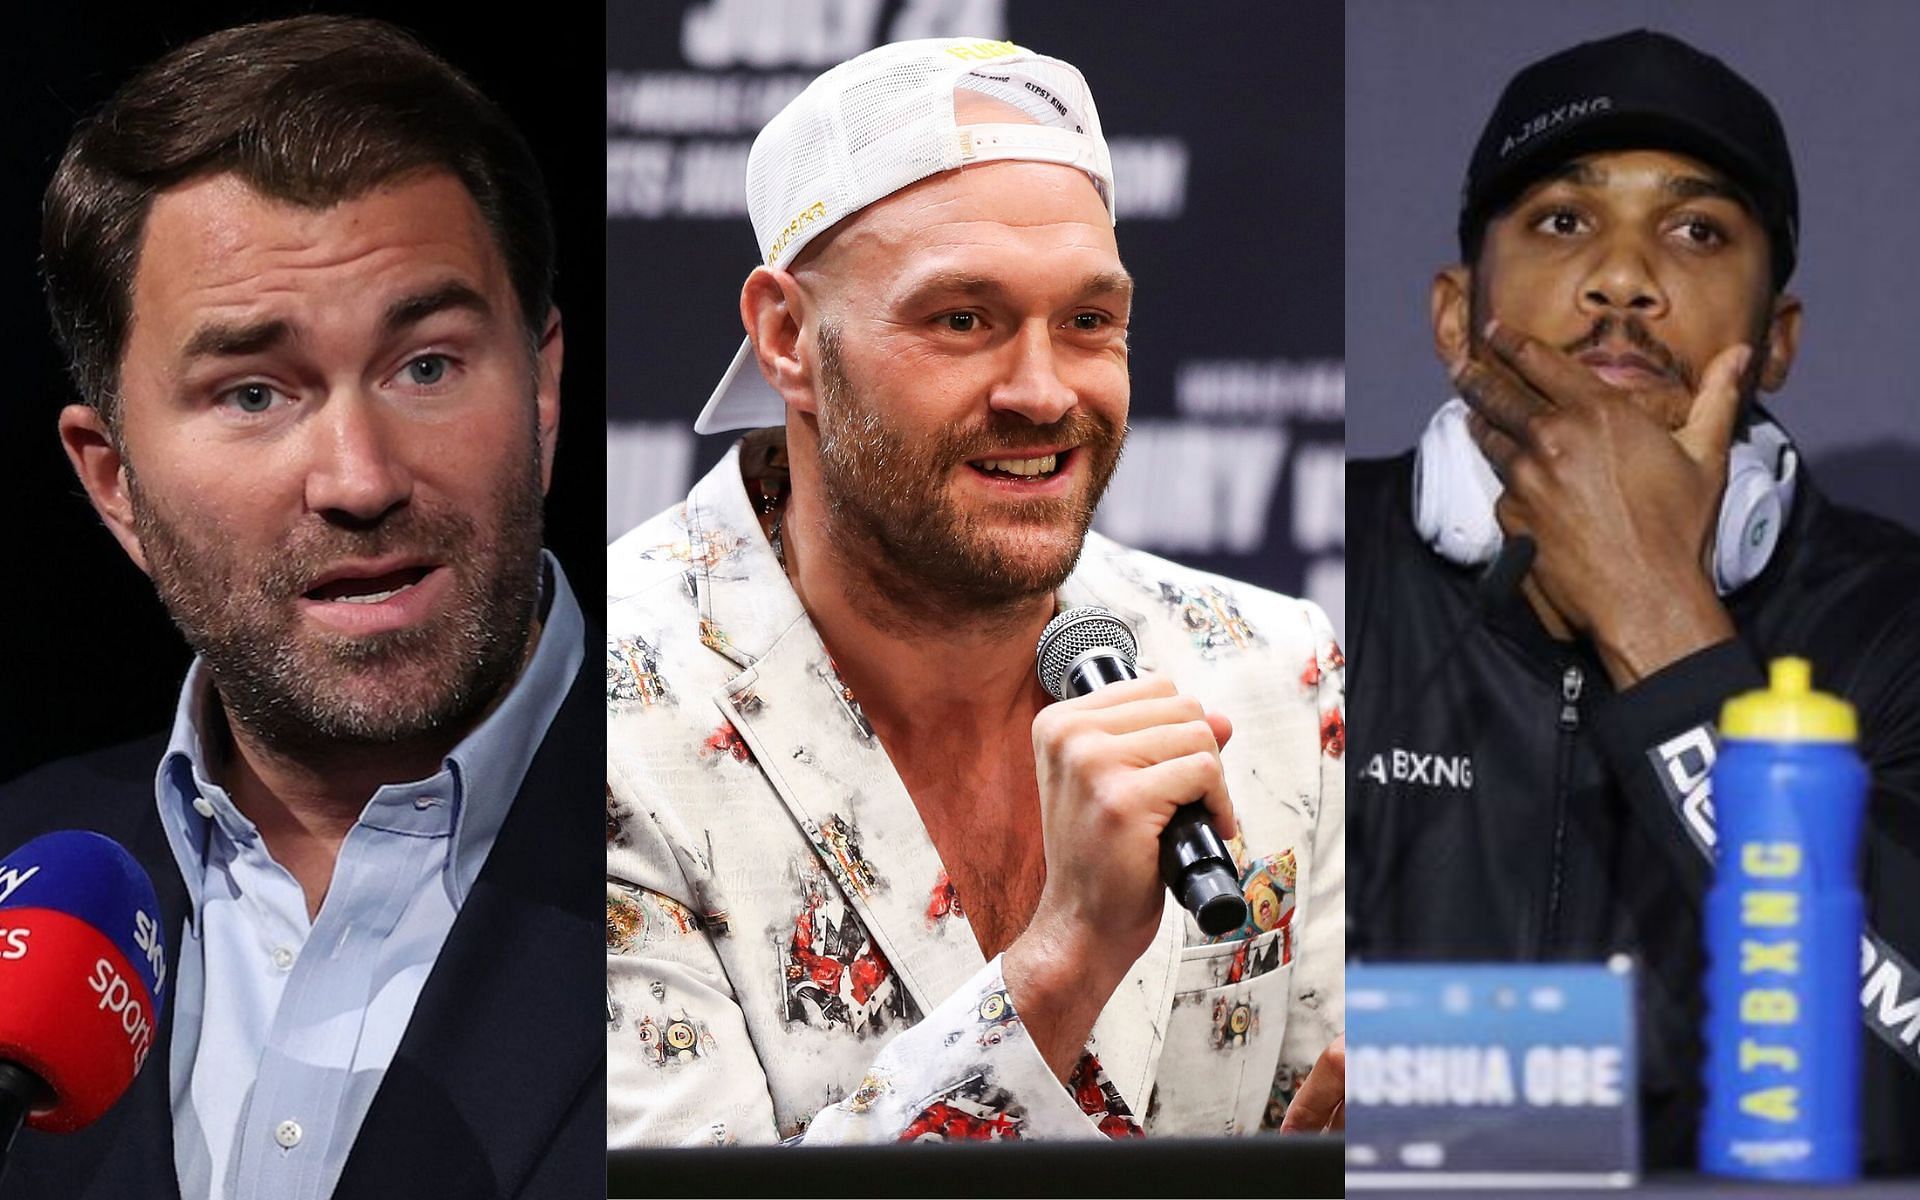 Eddie Hearn (right), Tyson Fury (center), and Anthony Joshua (right) (Image credits Getty Images)